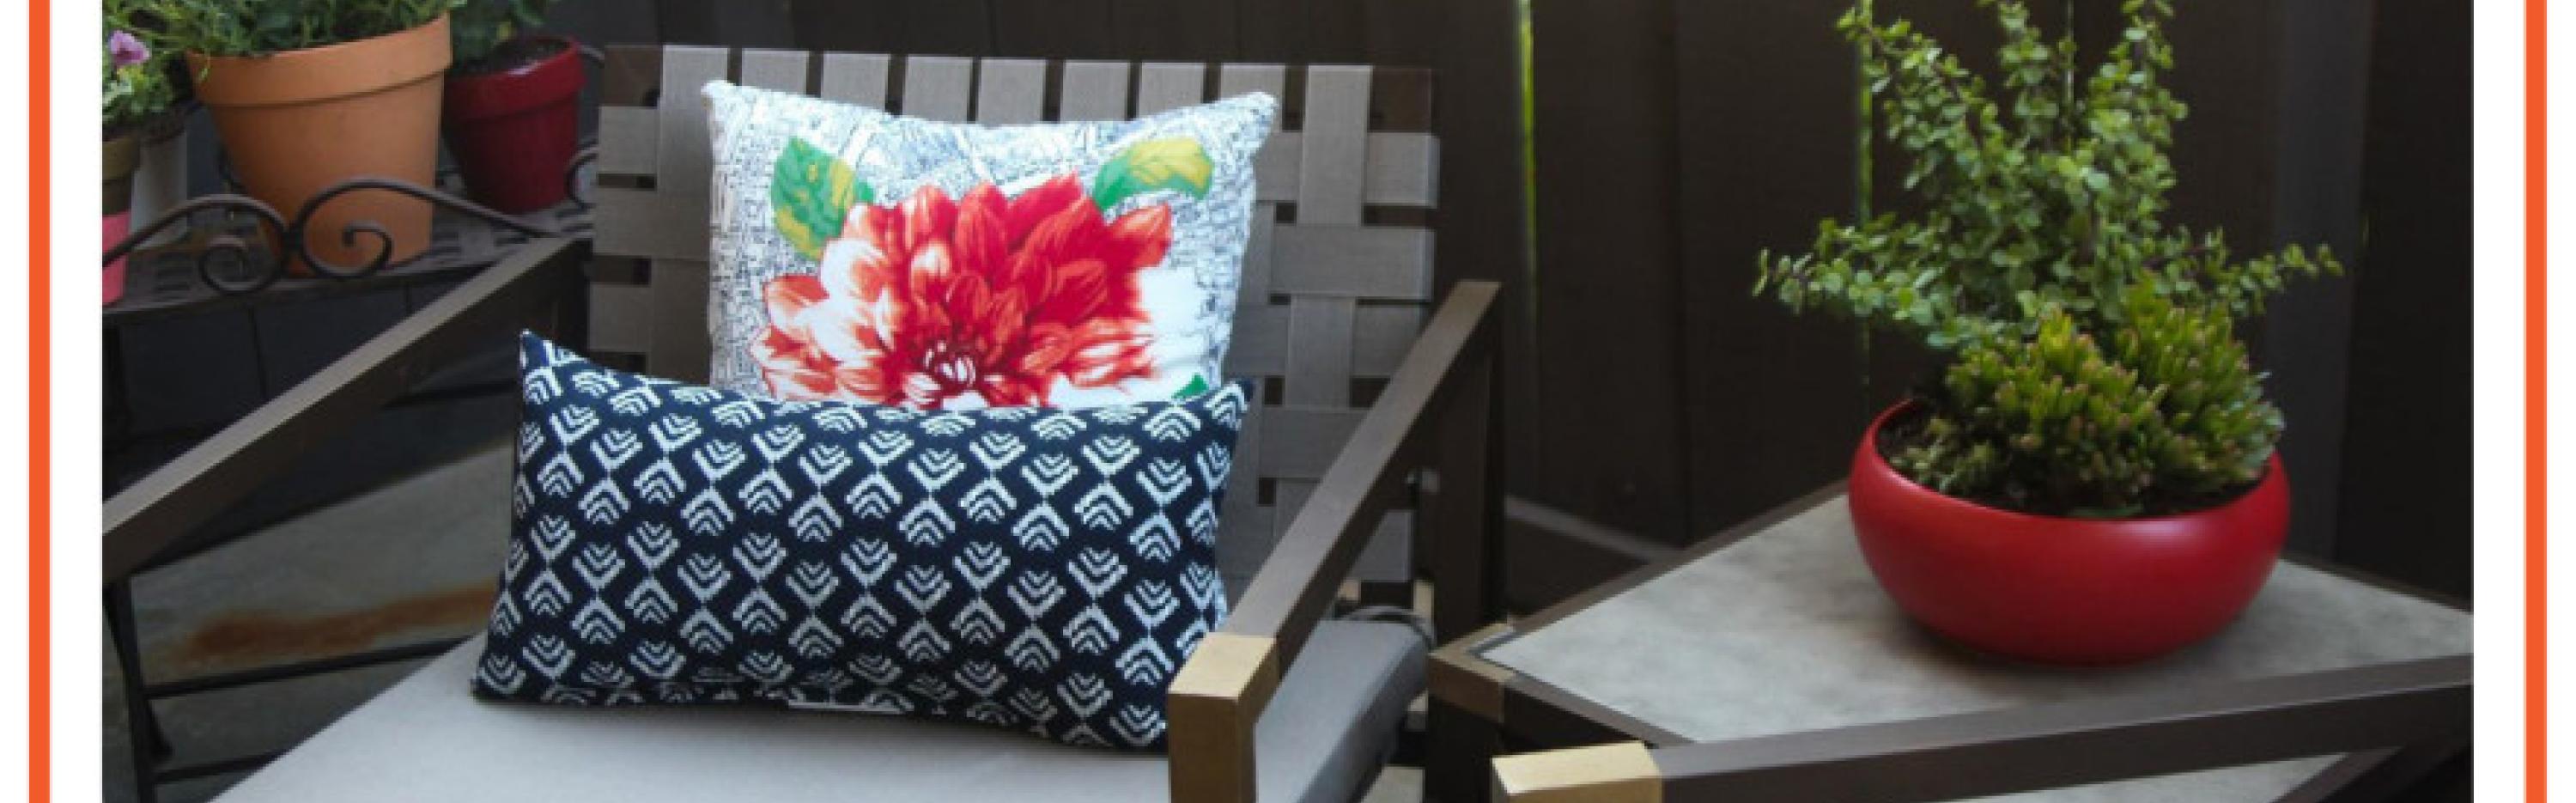 Patio chair with bright pillows